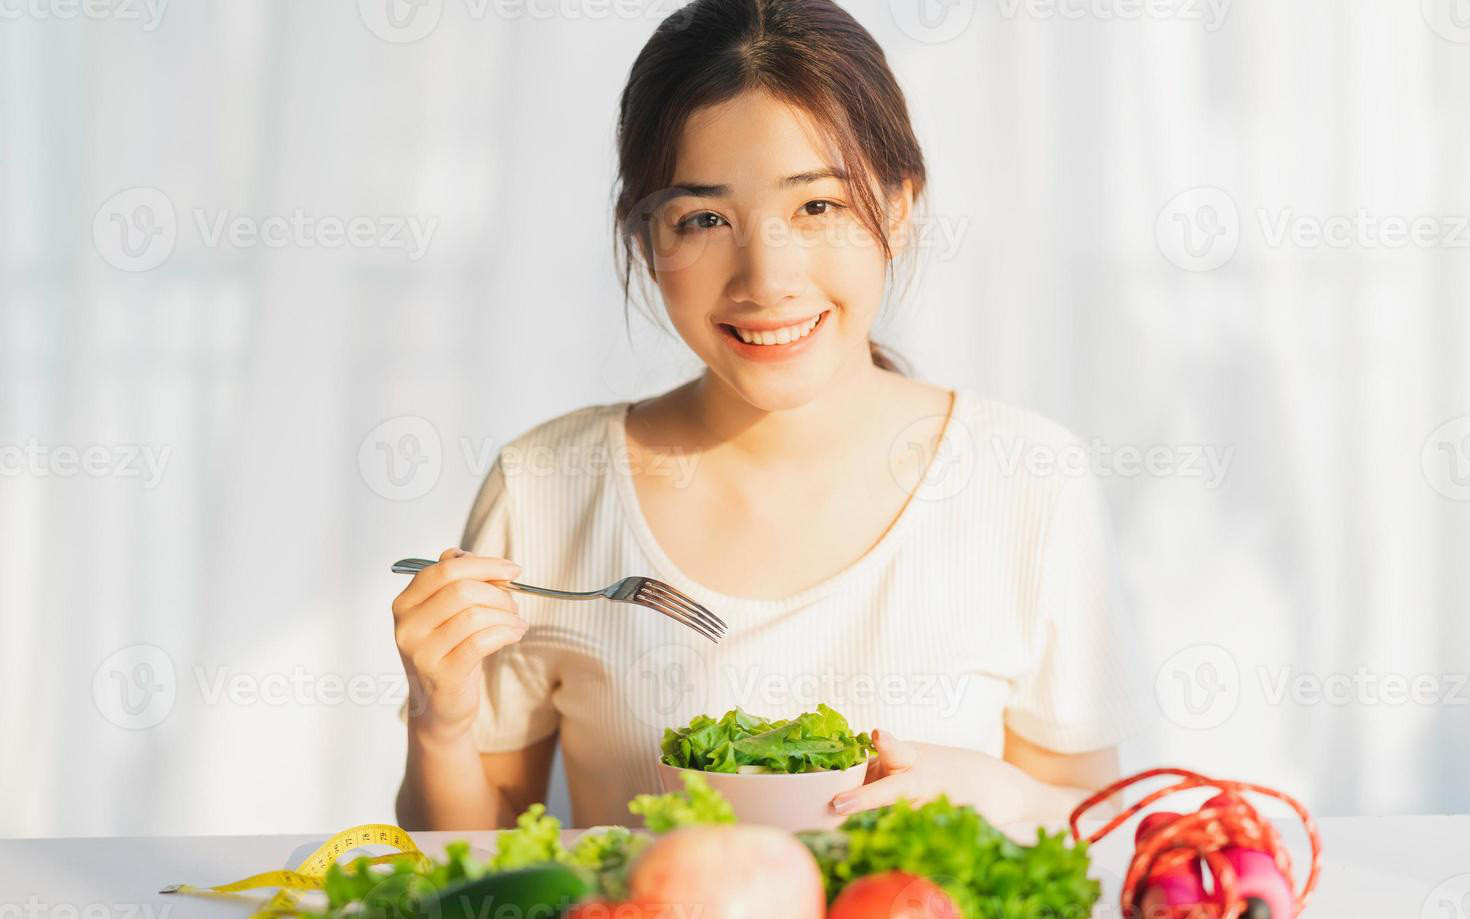 young-woman-is-eating-green-vegetables-for-weight-loss-photo-16477066775301671261015-0-0-919-1470-crop-1647706686368986941698-4590.jpg